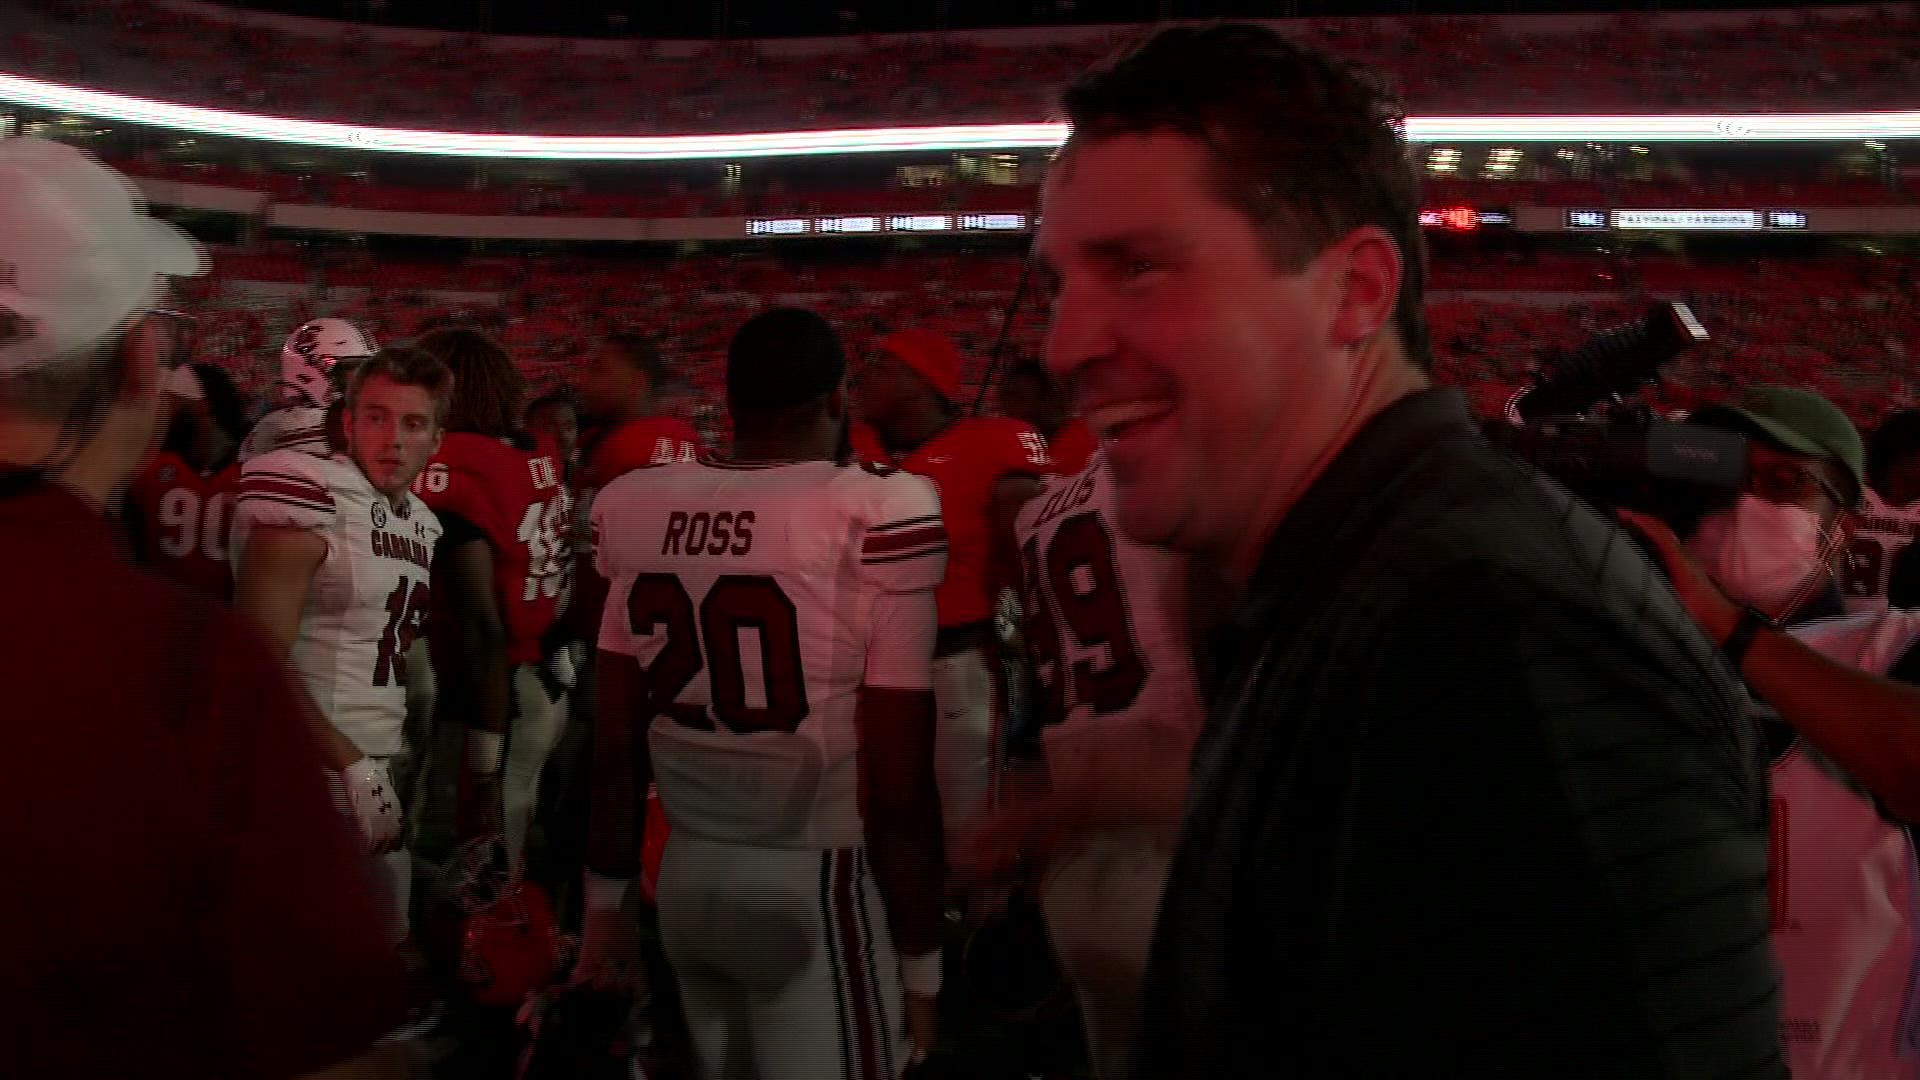 Georgia's Will Muschamp gives well-wishes to his former players following the the Bulldogs' win over the Gamecocks. Muschamp was USC's head coach from 2016-2020.